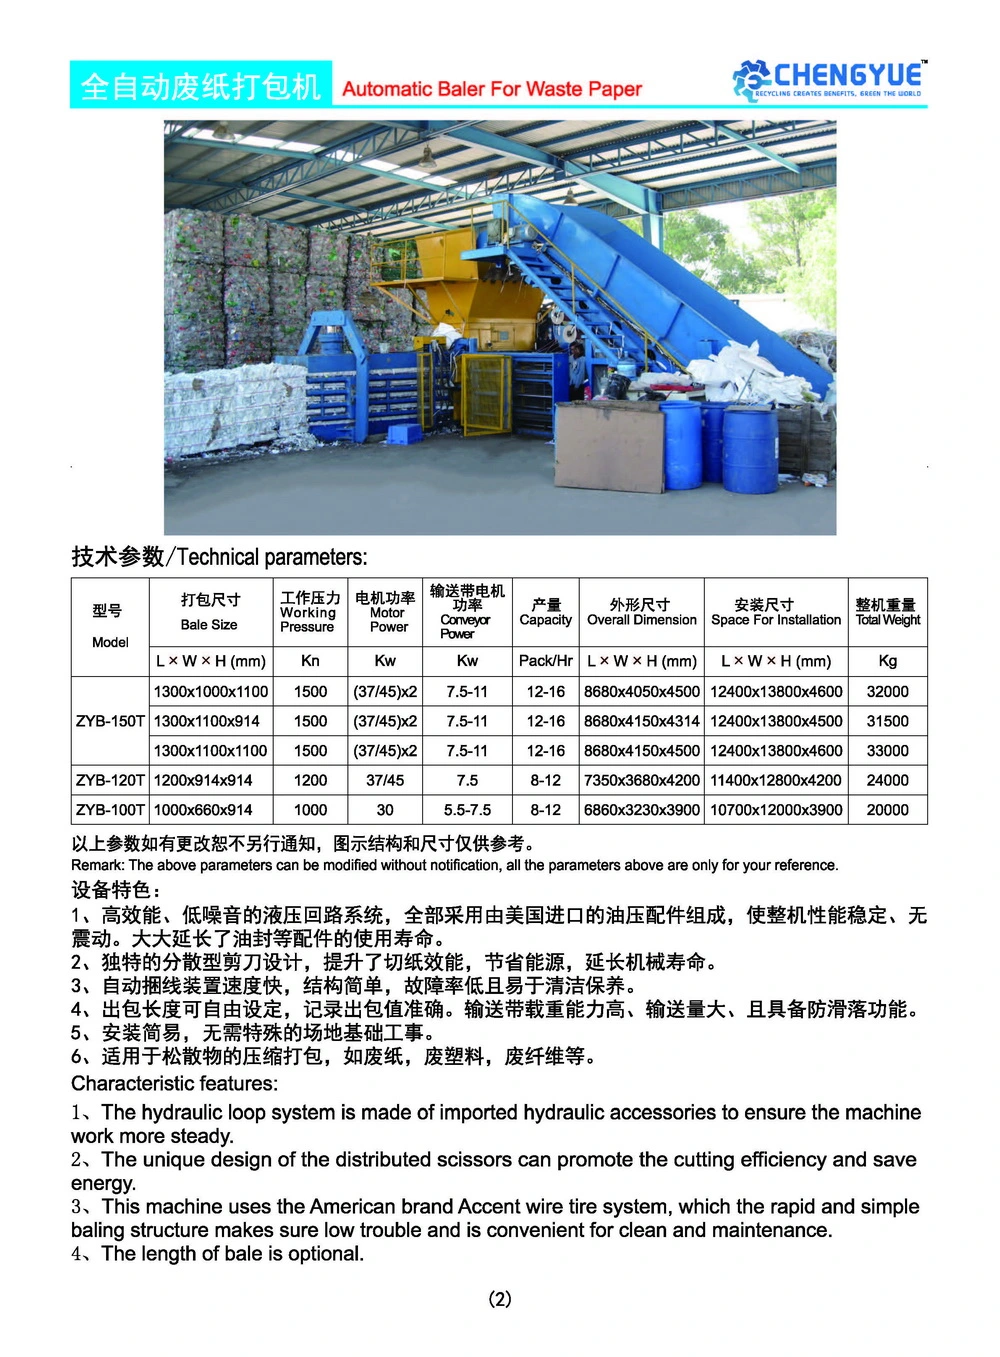 Automatic Horizontal Hydraulic Twin RAM Waste Paper and Plastic Baler